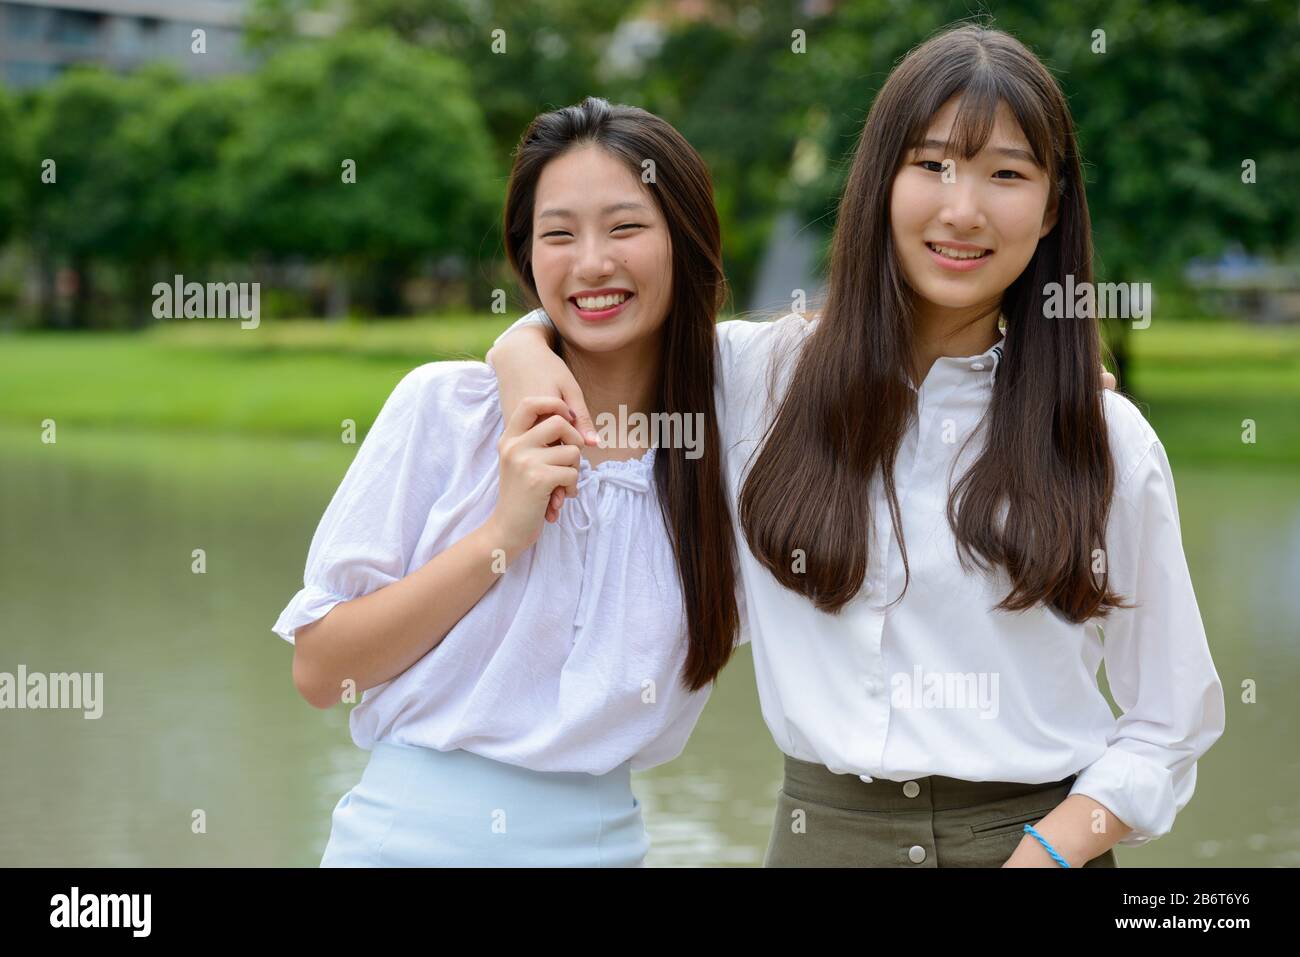 Two happy young beautiful Asian teenage girls bonding together at the park Stock Photo